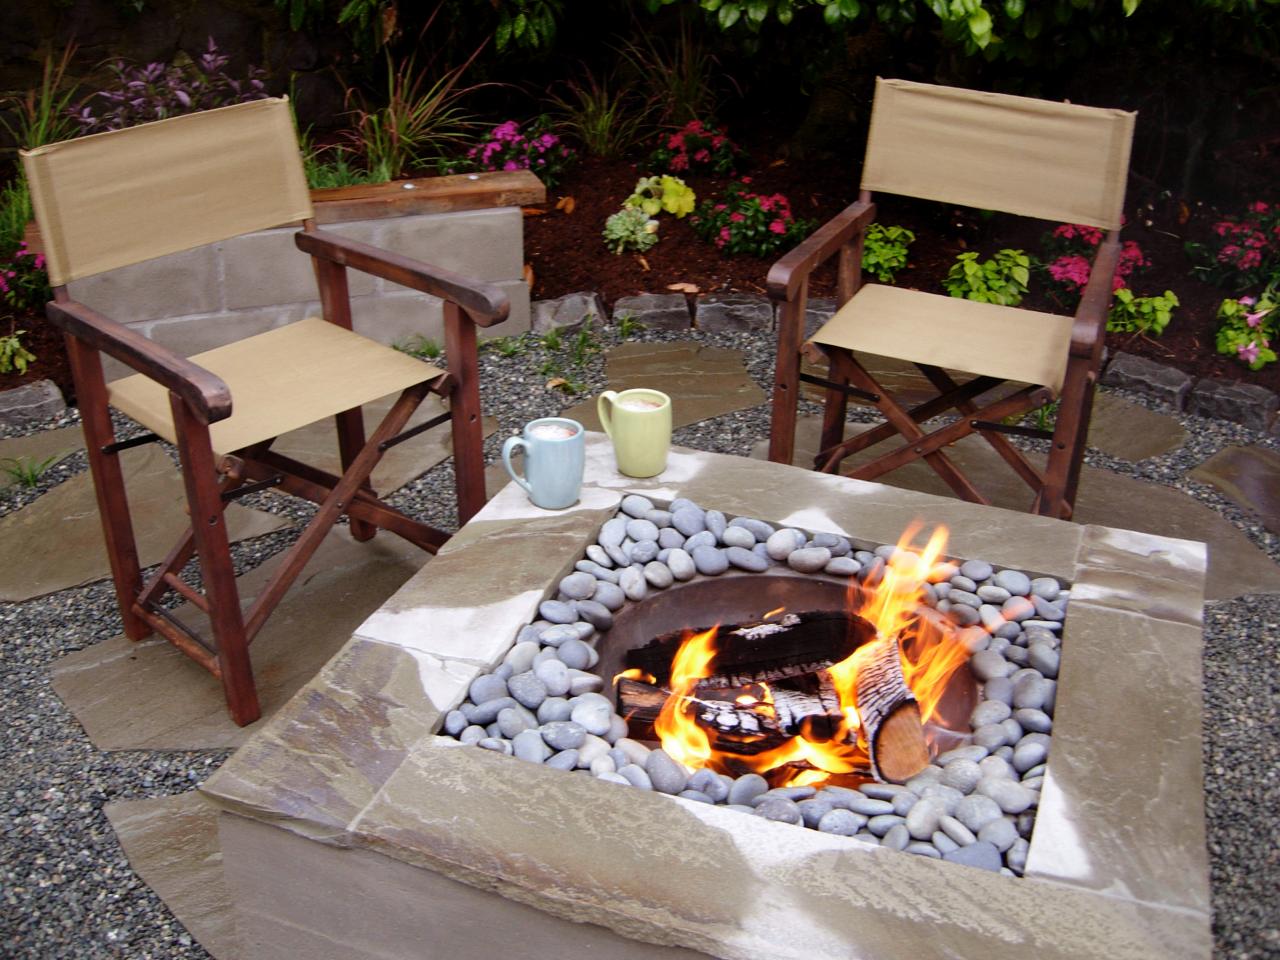 How To Make A Concrete Fire Feature, Is It Illegal To Have A Fire Pit In Your Backyard